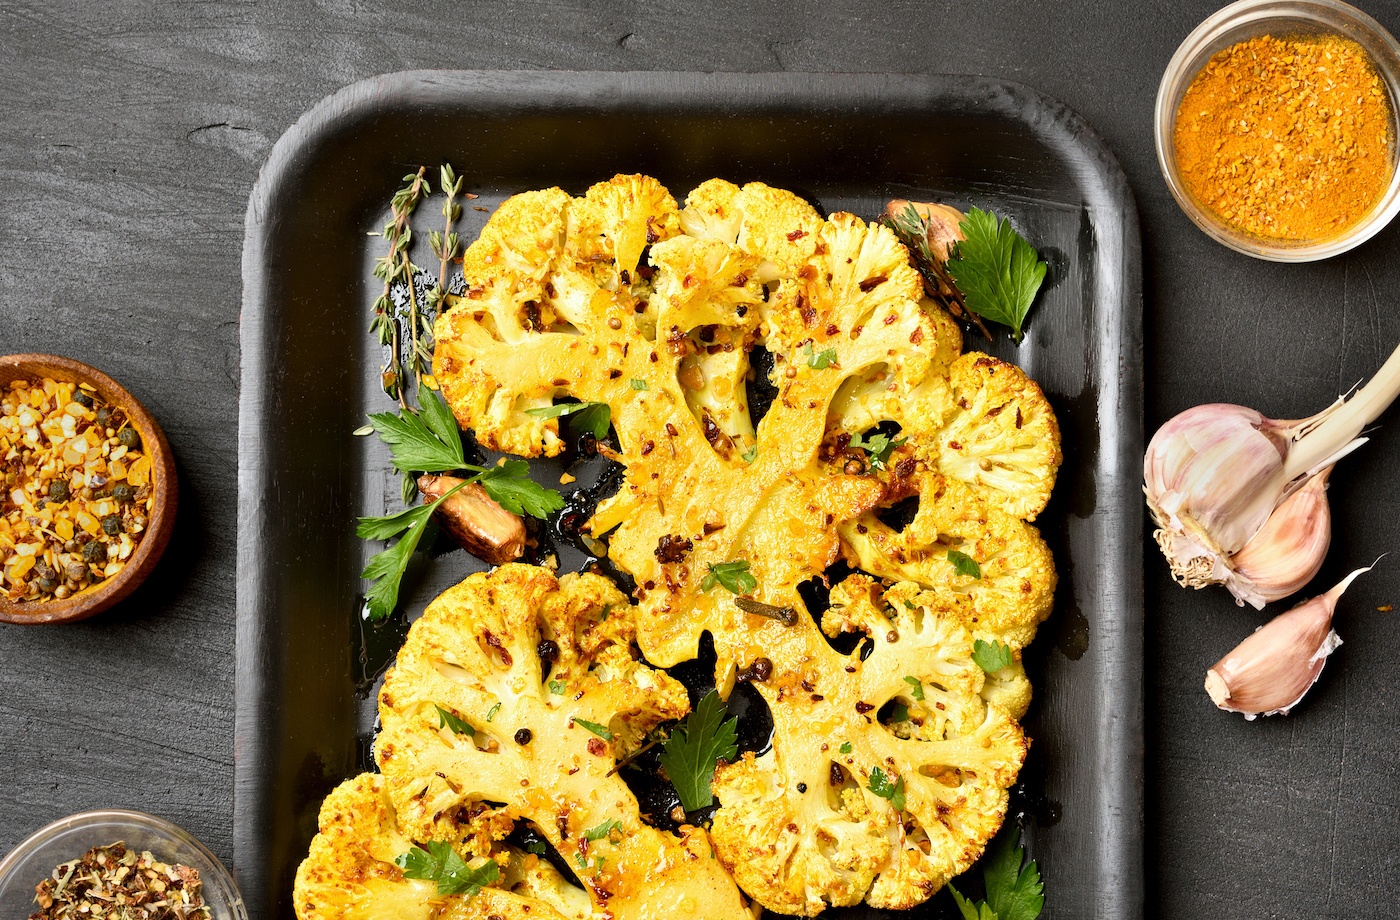 Cooked cauliflower, a food high in sulfur, sits on a baking sheet surrounded by spices and a sauce.